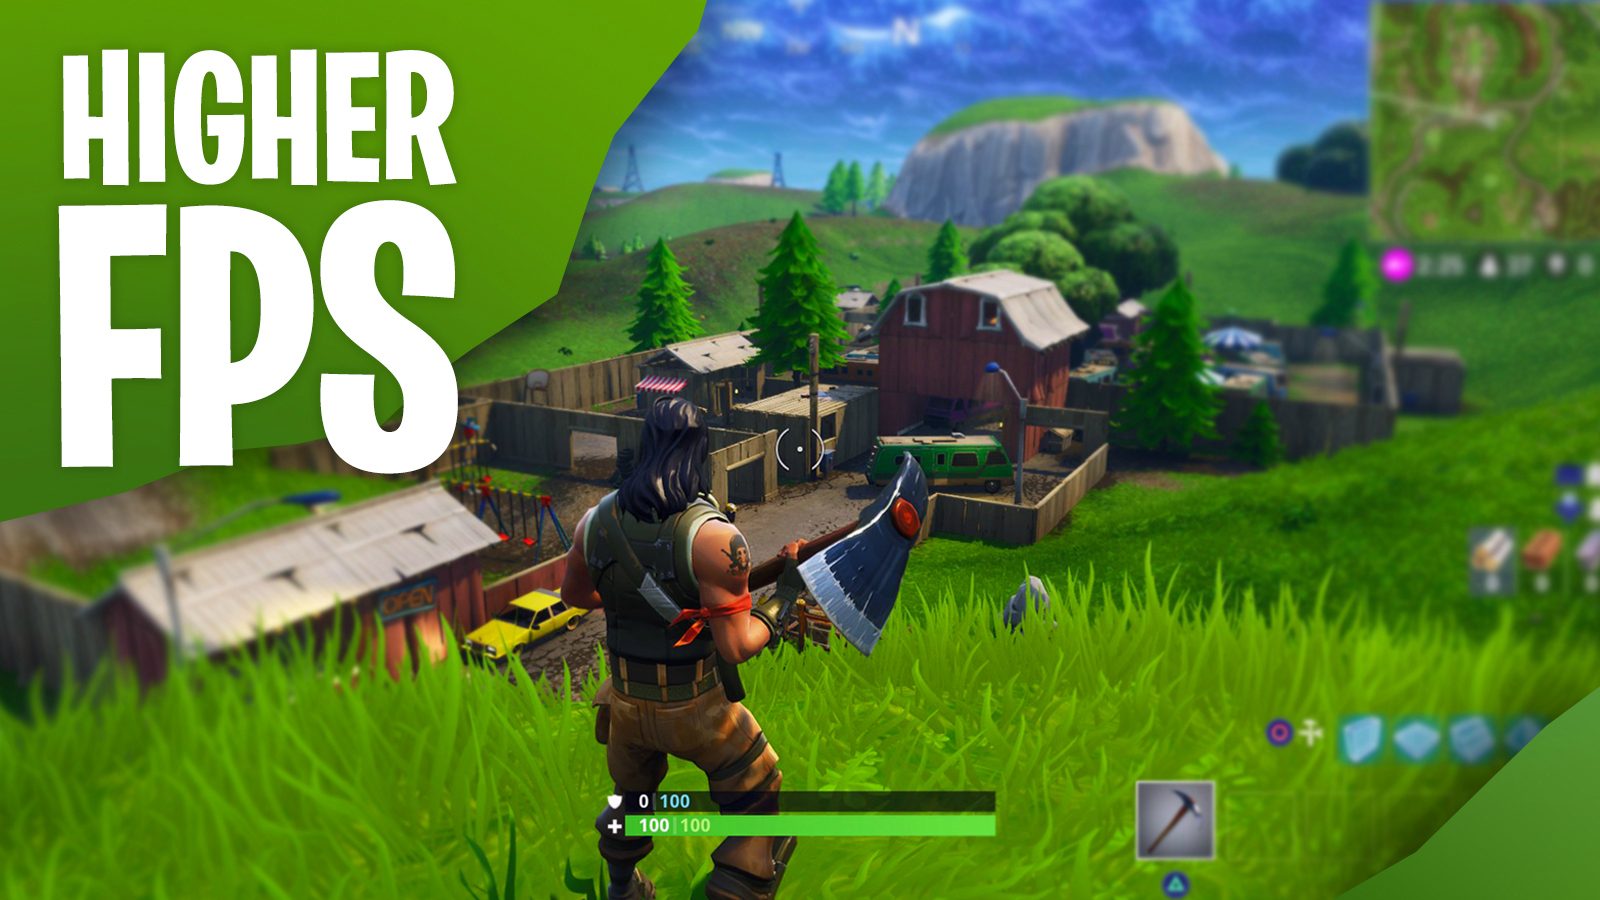 Fortnite: How to get higher FPS reduce lag on PC, PS4 and Xbox One - Dexerto